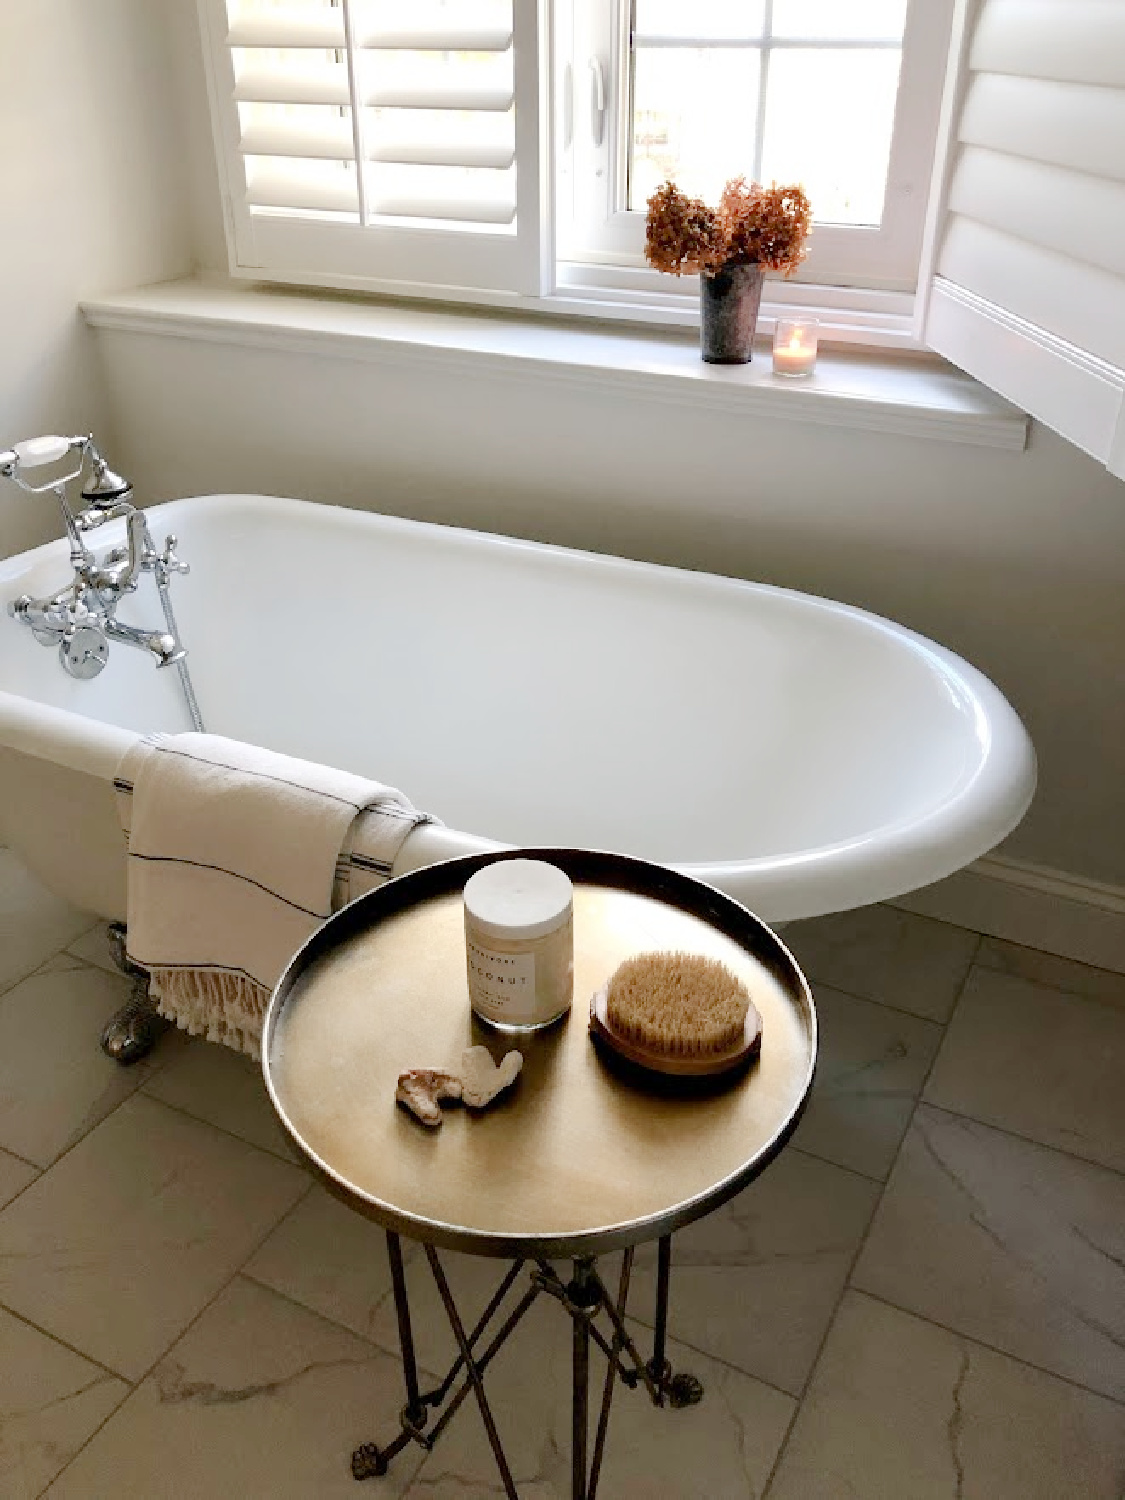 Vintage clawfoot tub in a serene white bath with plantation shutters - Hello Lovely Studio.